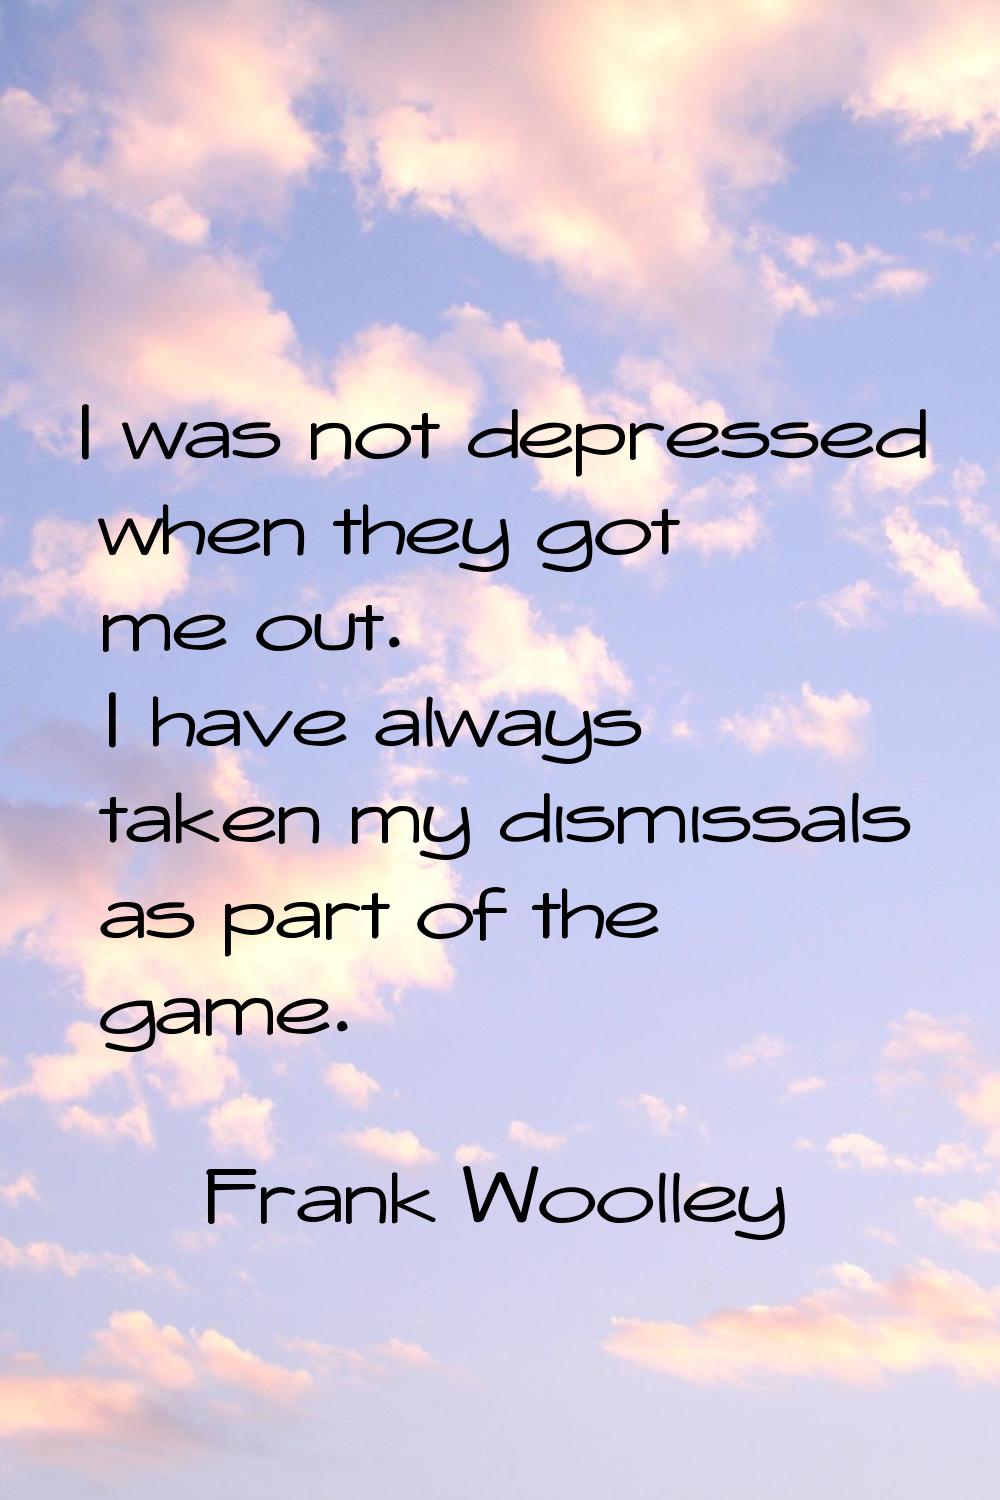 I was not depressed when they got me out. I have always taken my dismissals as part of the game.